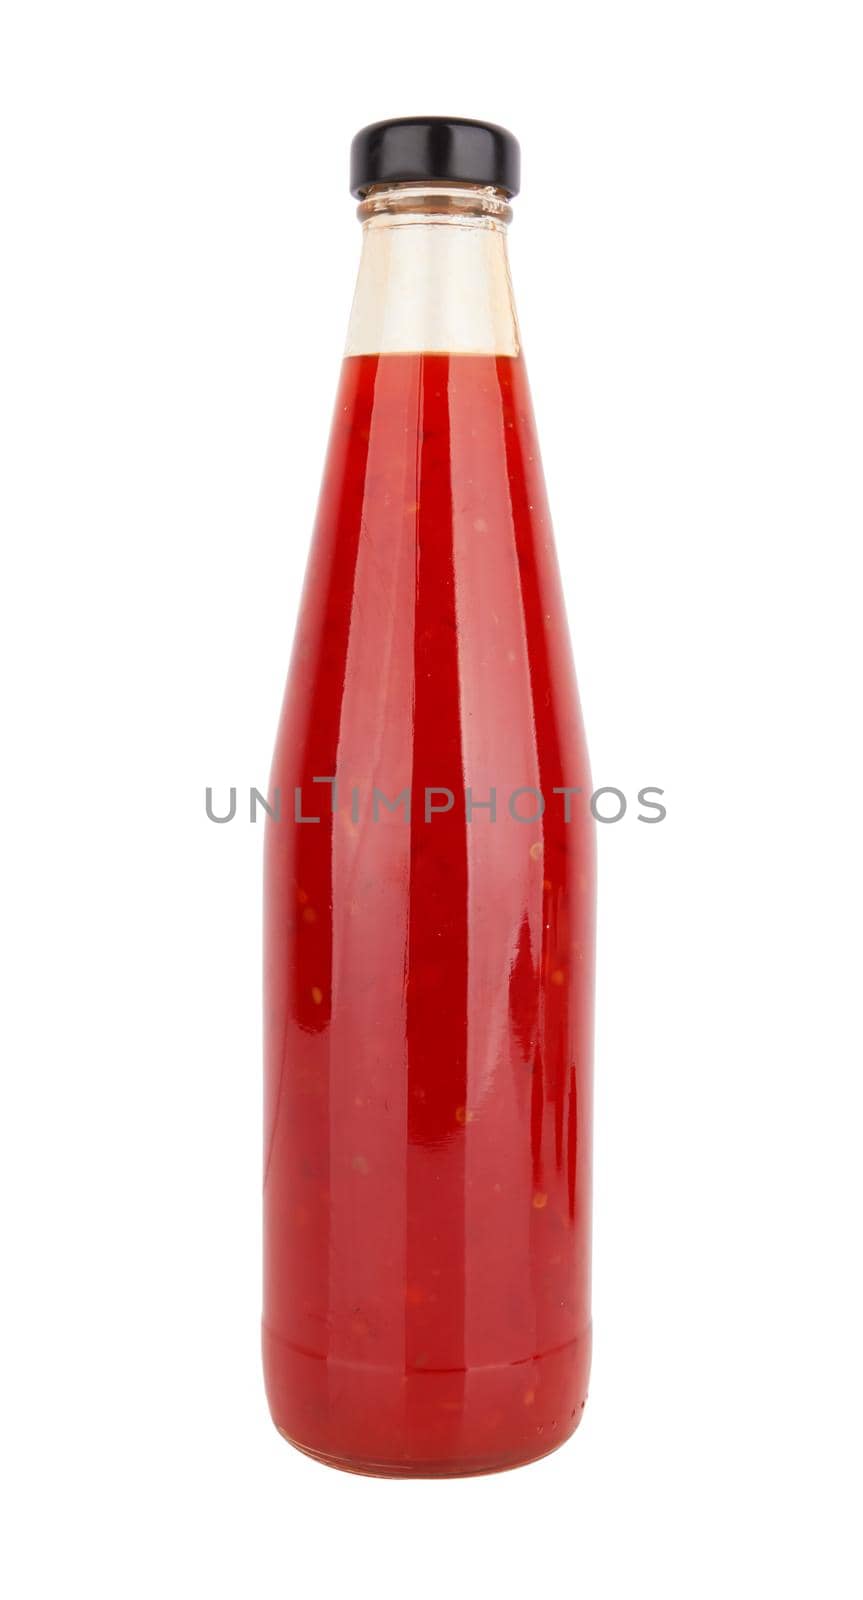 Bottle of tomato sauce isolated on a white background